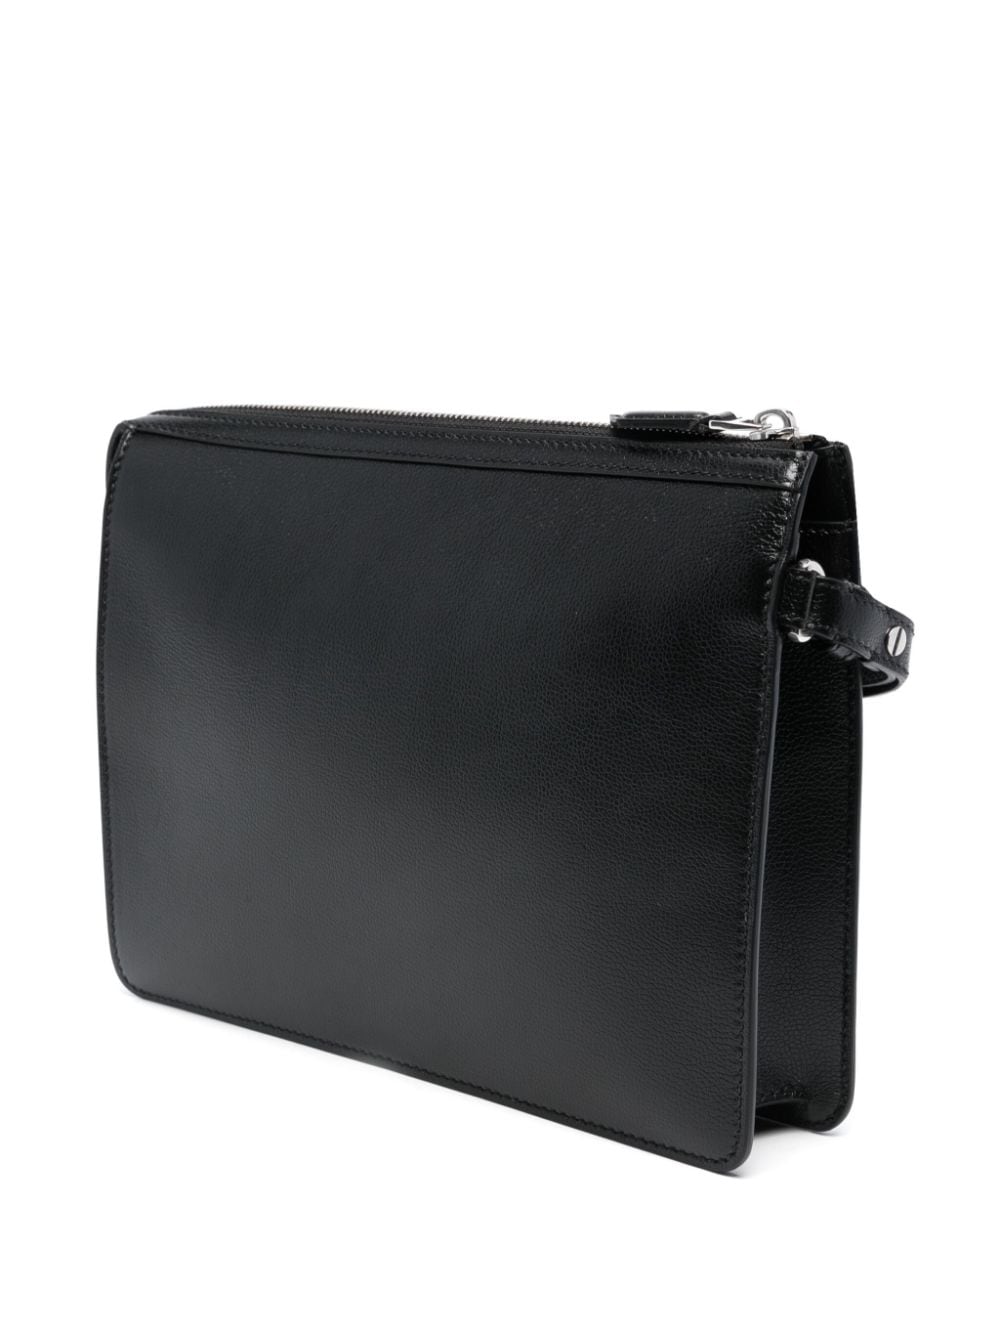 Shop Bally Banque Leather Clutch Bag In Black